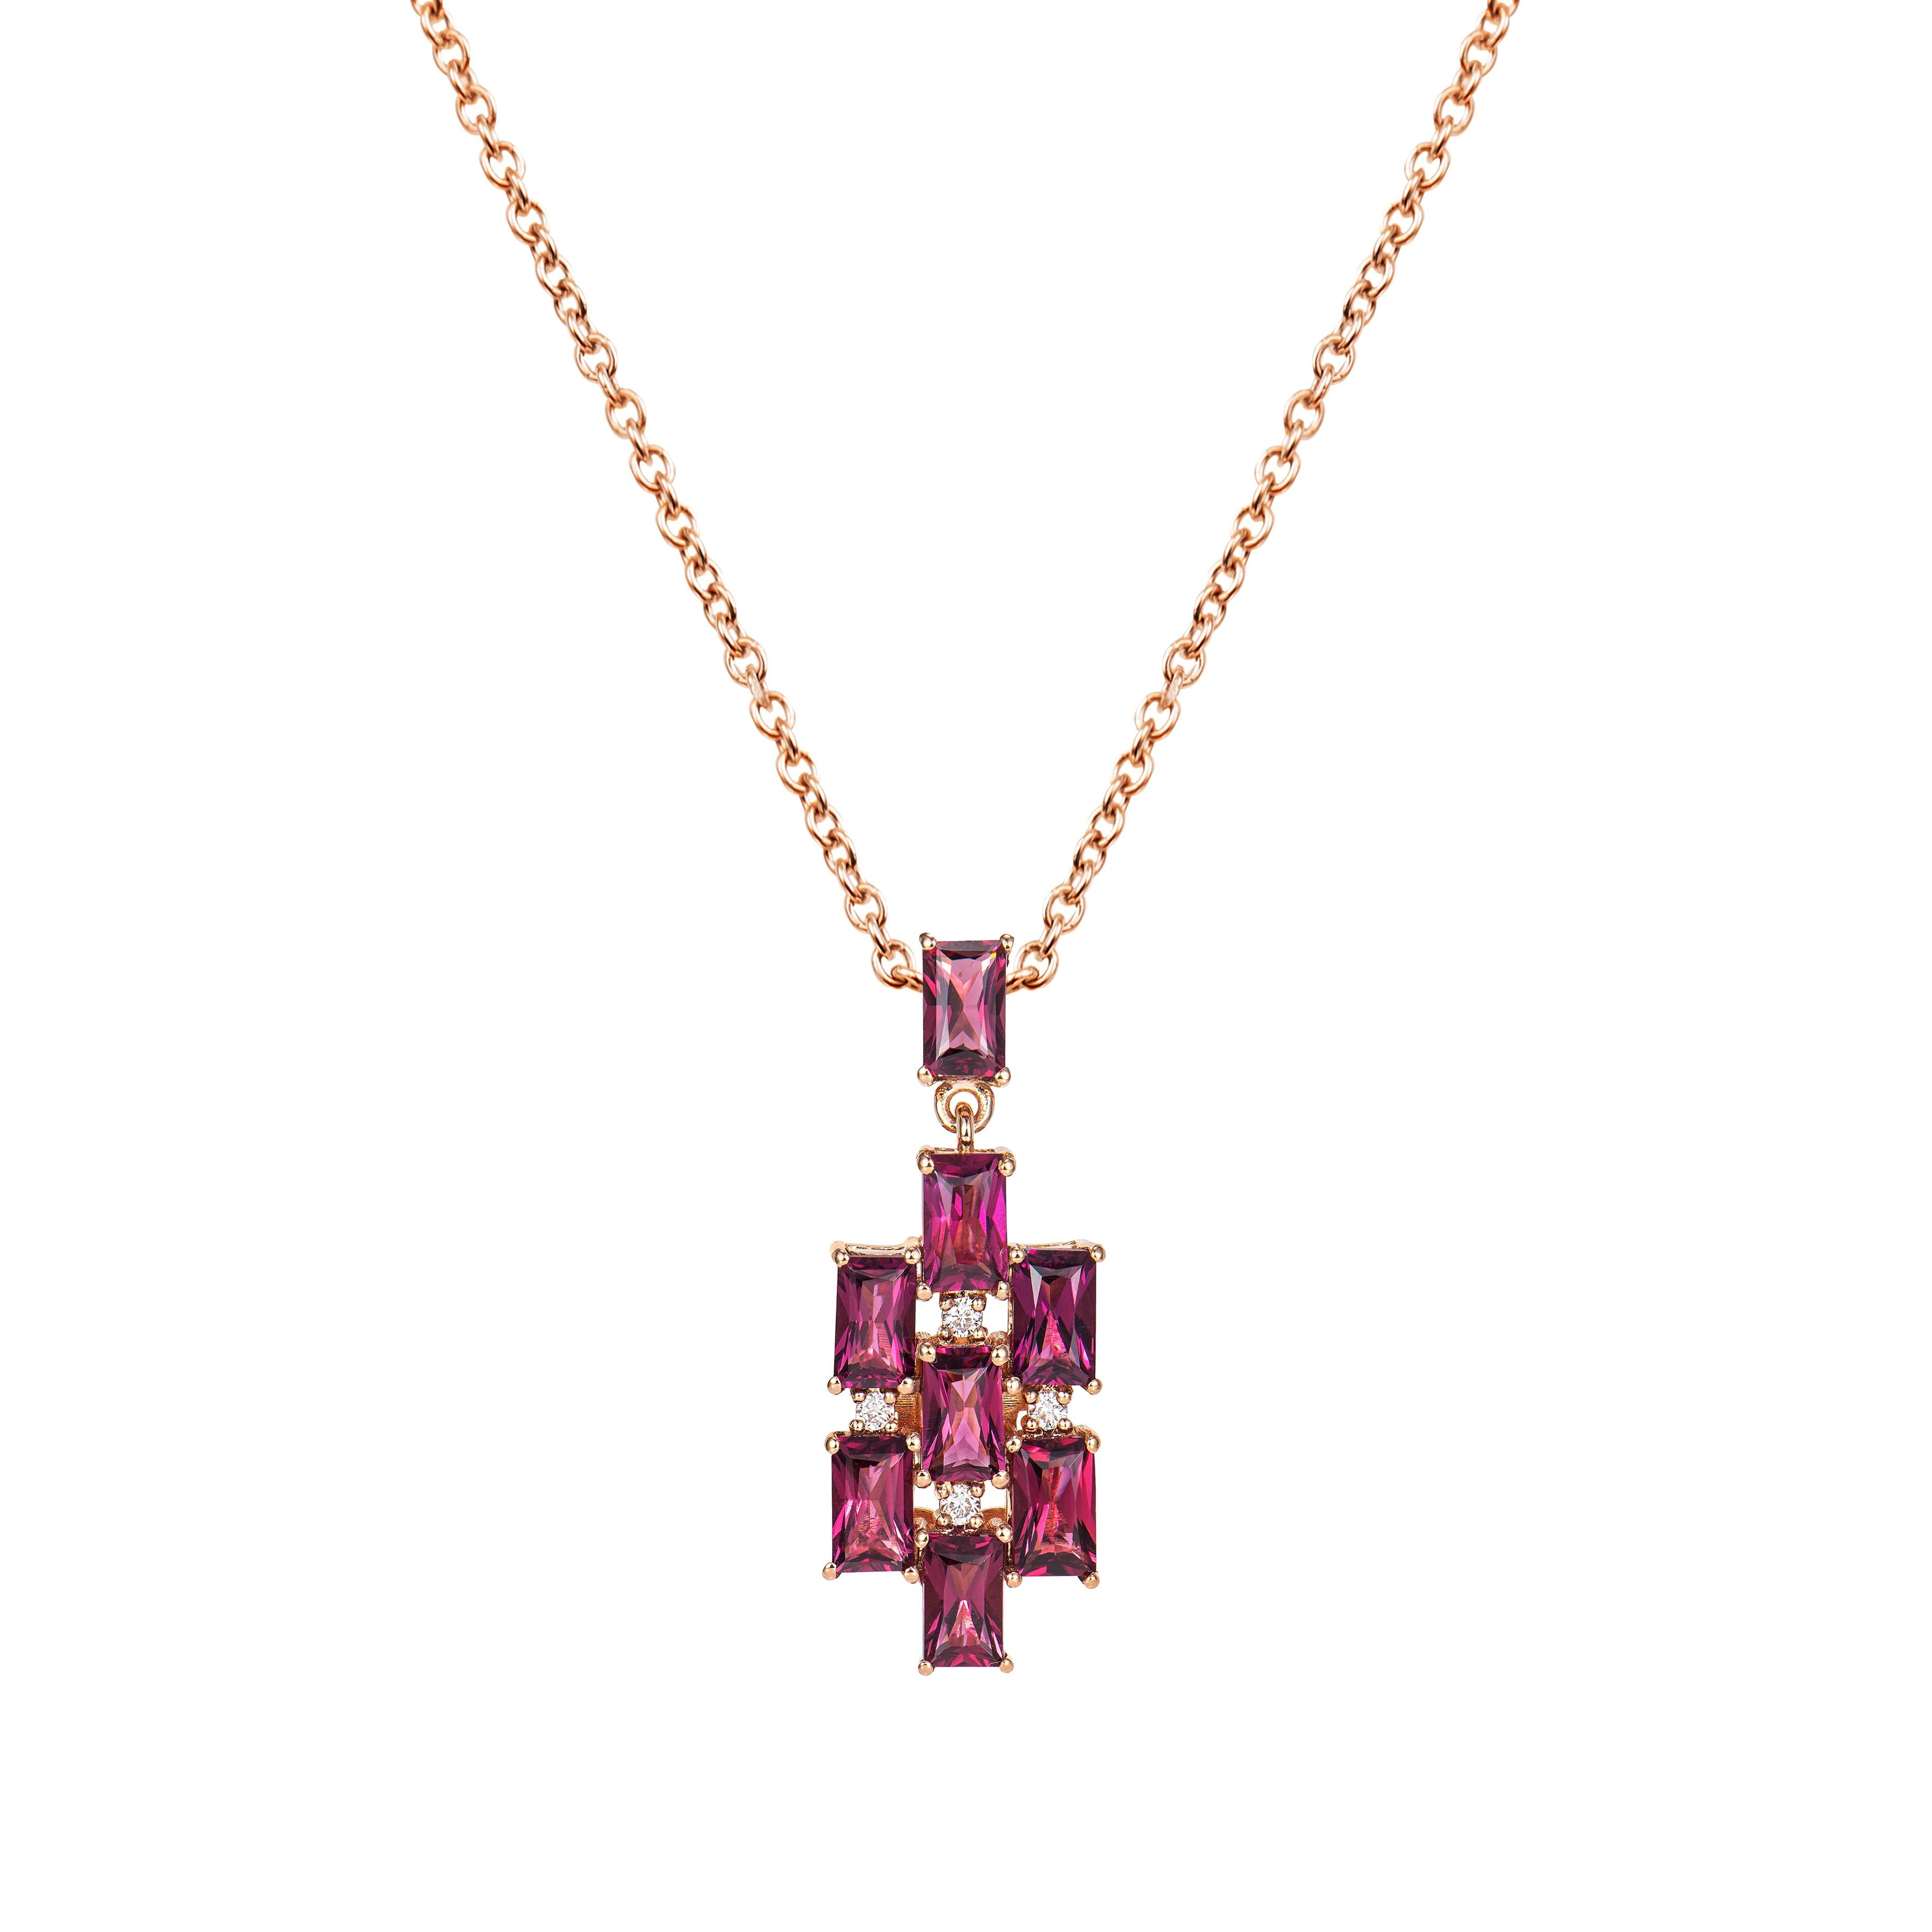 It is a fancy rhodolite pendant in an octagon shape. This pendant made of precious stone has a timeless, exquisite appeal that can be worn on a variety of occasions. Materials such as amethyst, citrine, and rhodolite are suitable. One of these is a